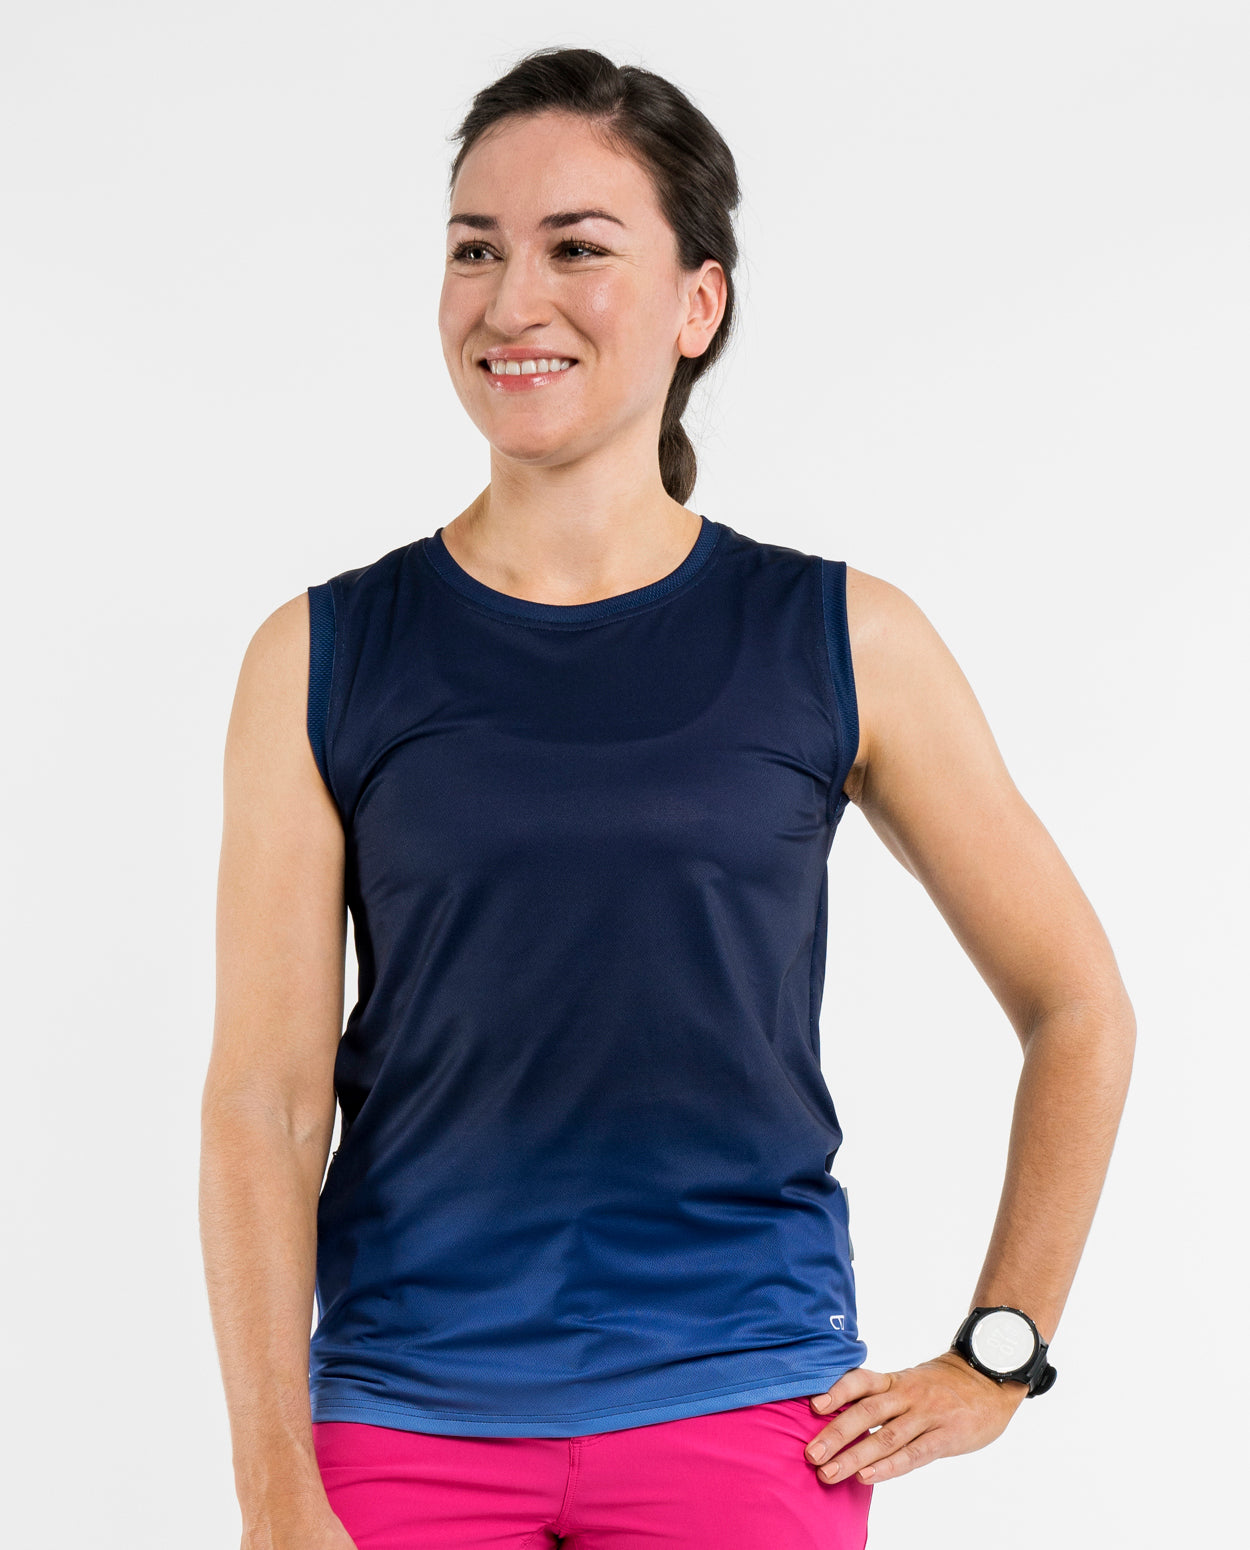 SAMPLE - Frost Navy Trail Signature Tank